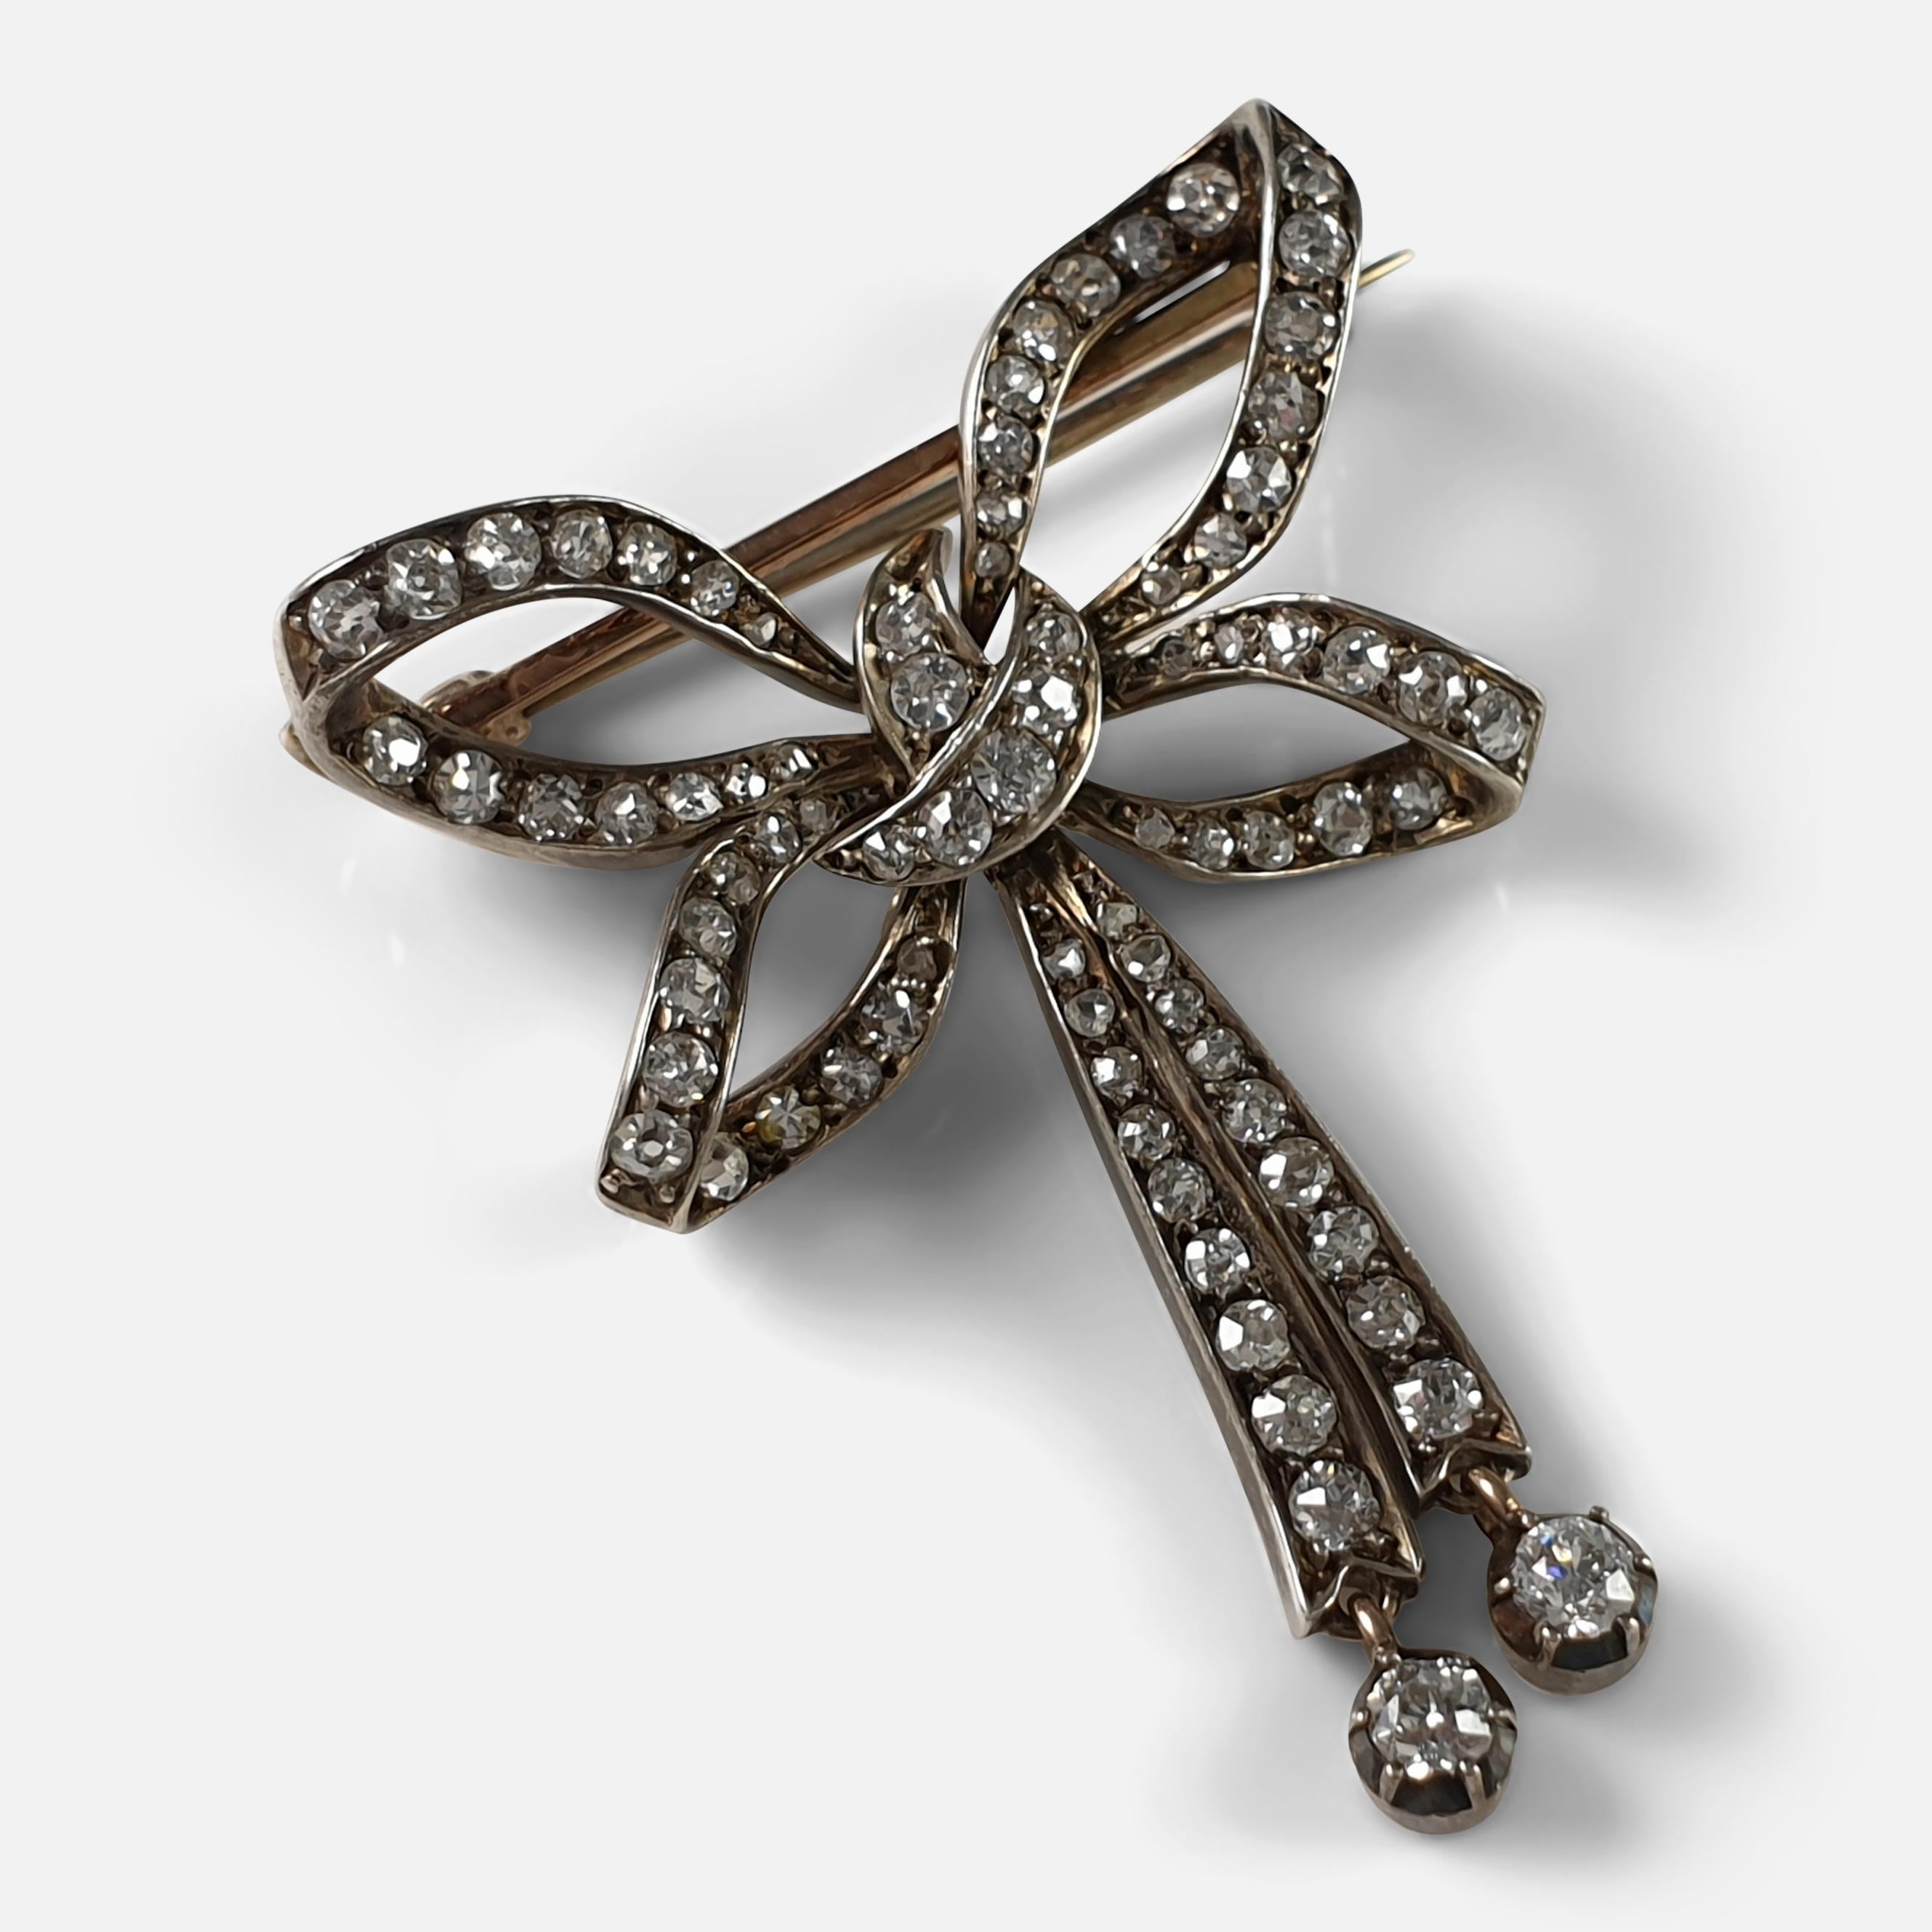 A Victorian silver and 9 karat gold old-cut diamond bow brooch. The brooch has been beautifully crafted to include 78 diamonds set into the bow brooch. The total diamond weight is approximately 1.40cts. This fine quality jewel is in good condition